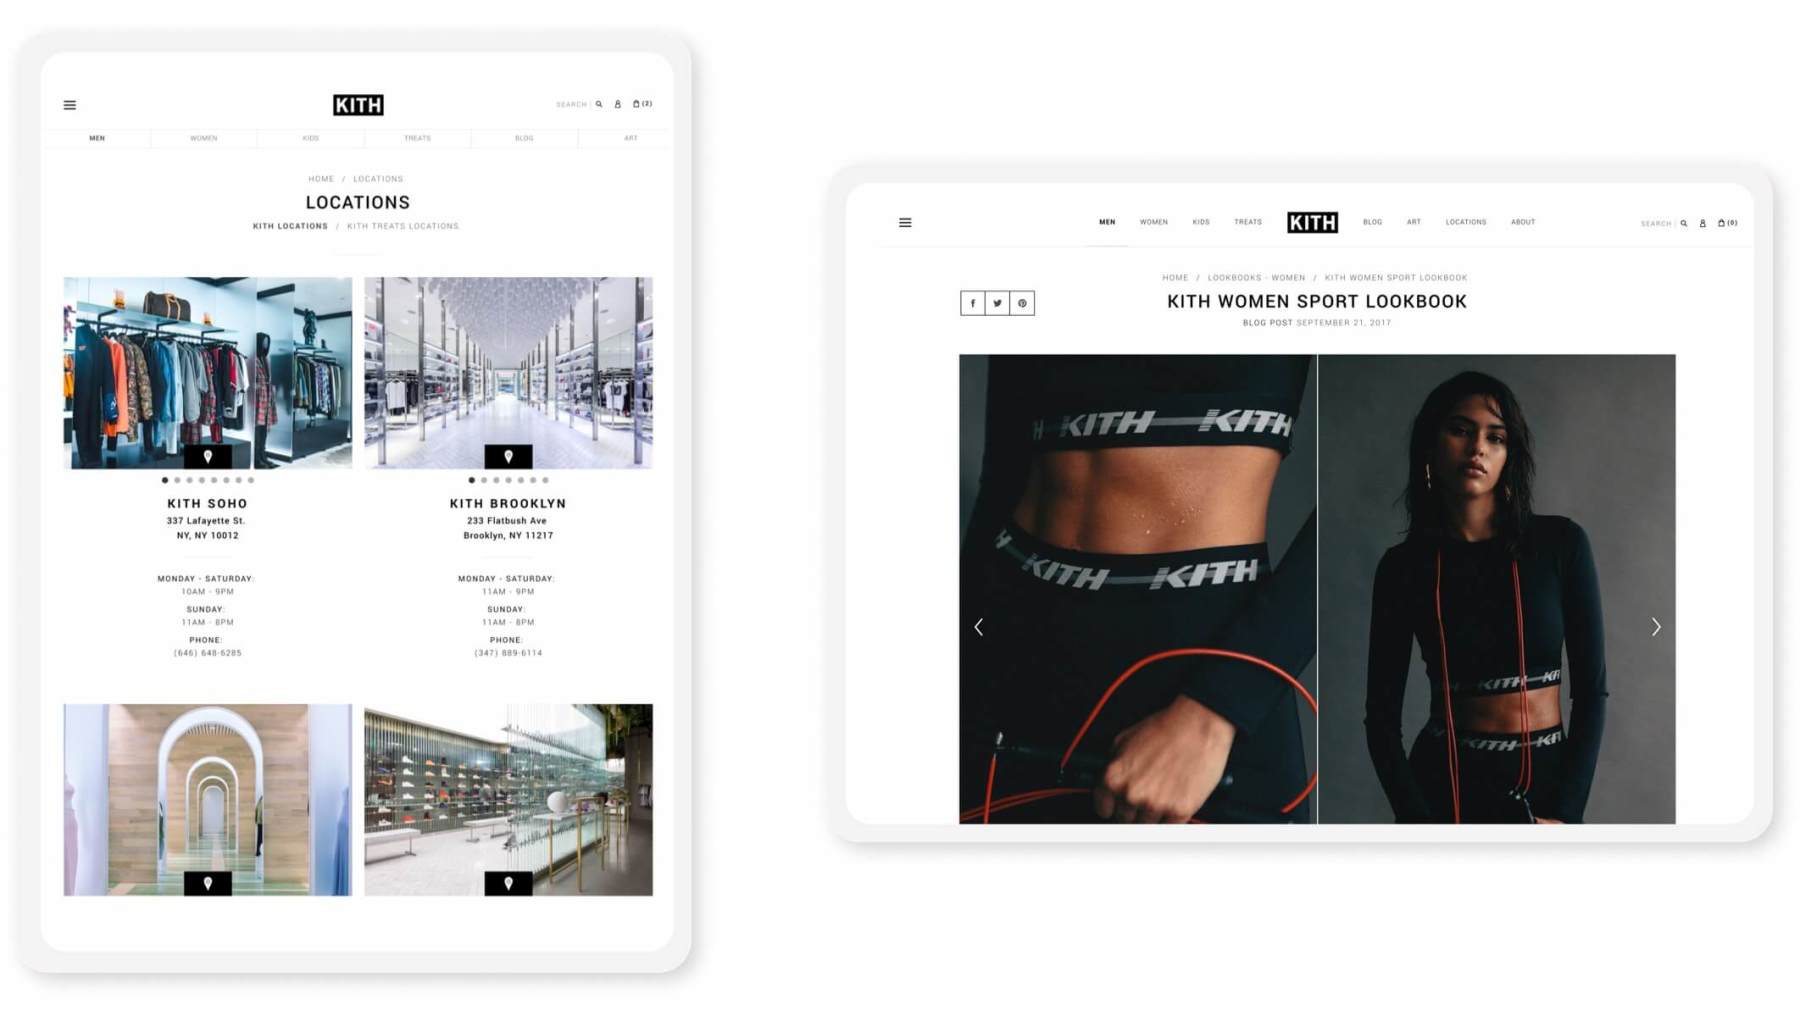 kith shopify website pages on tablets in portrait and landscape modes